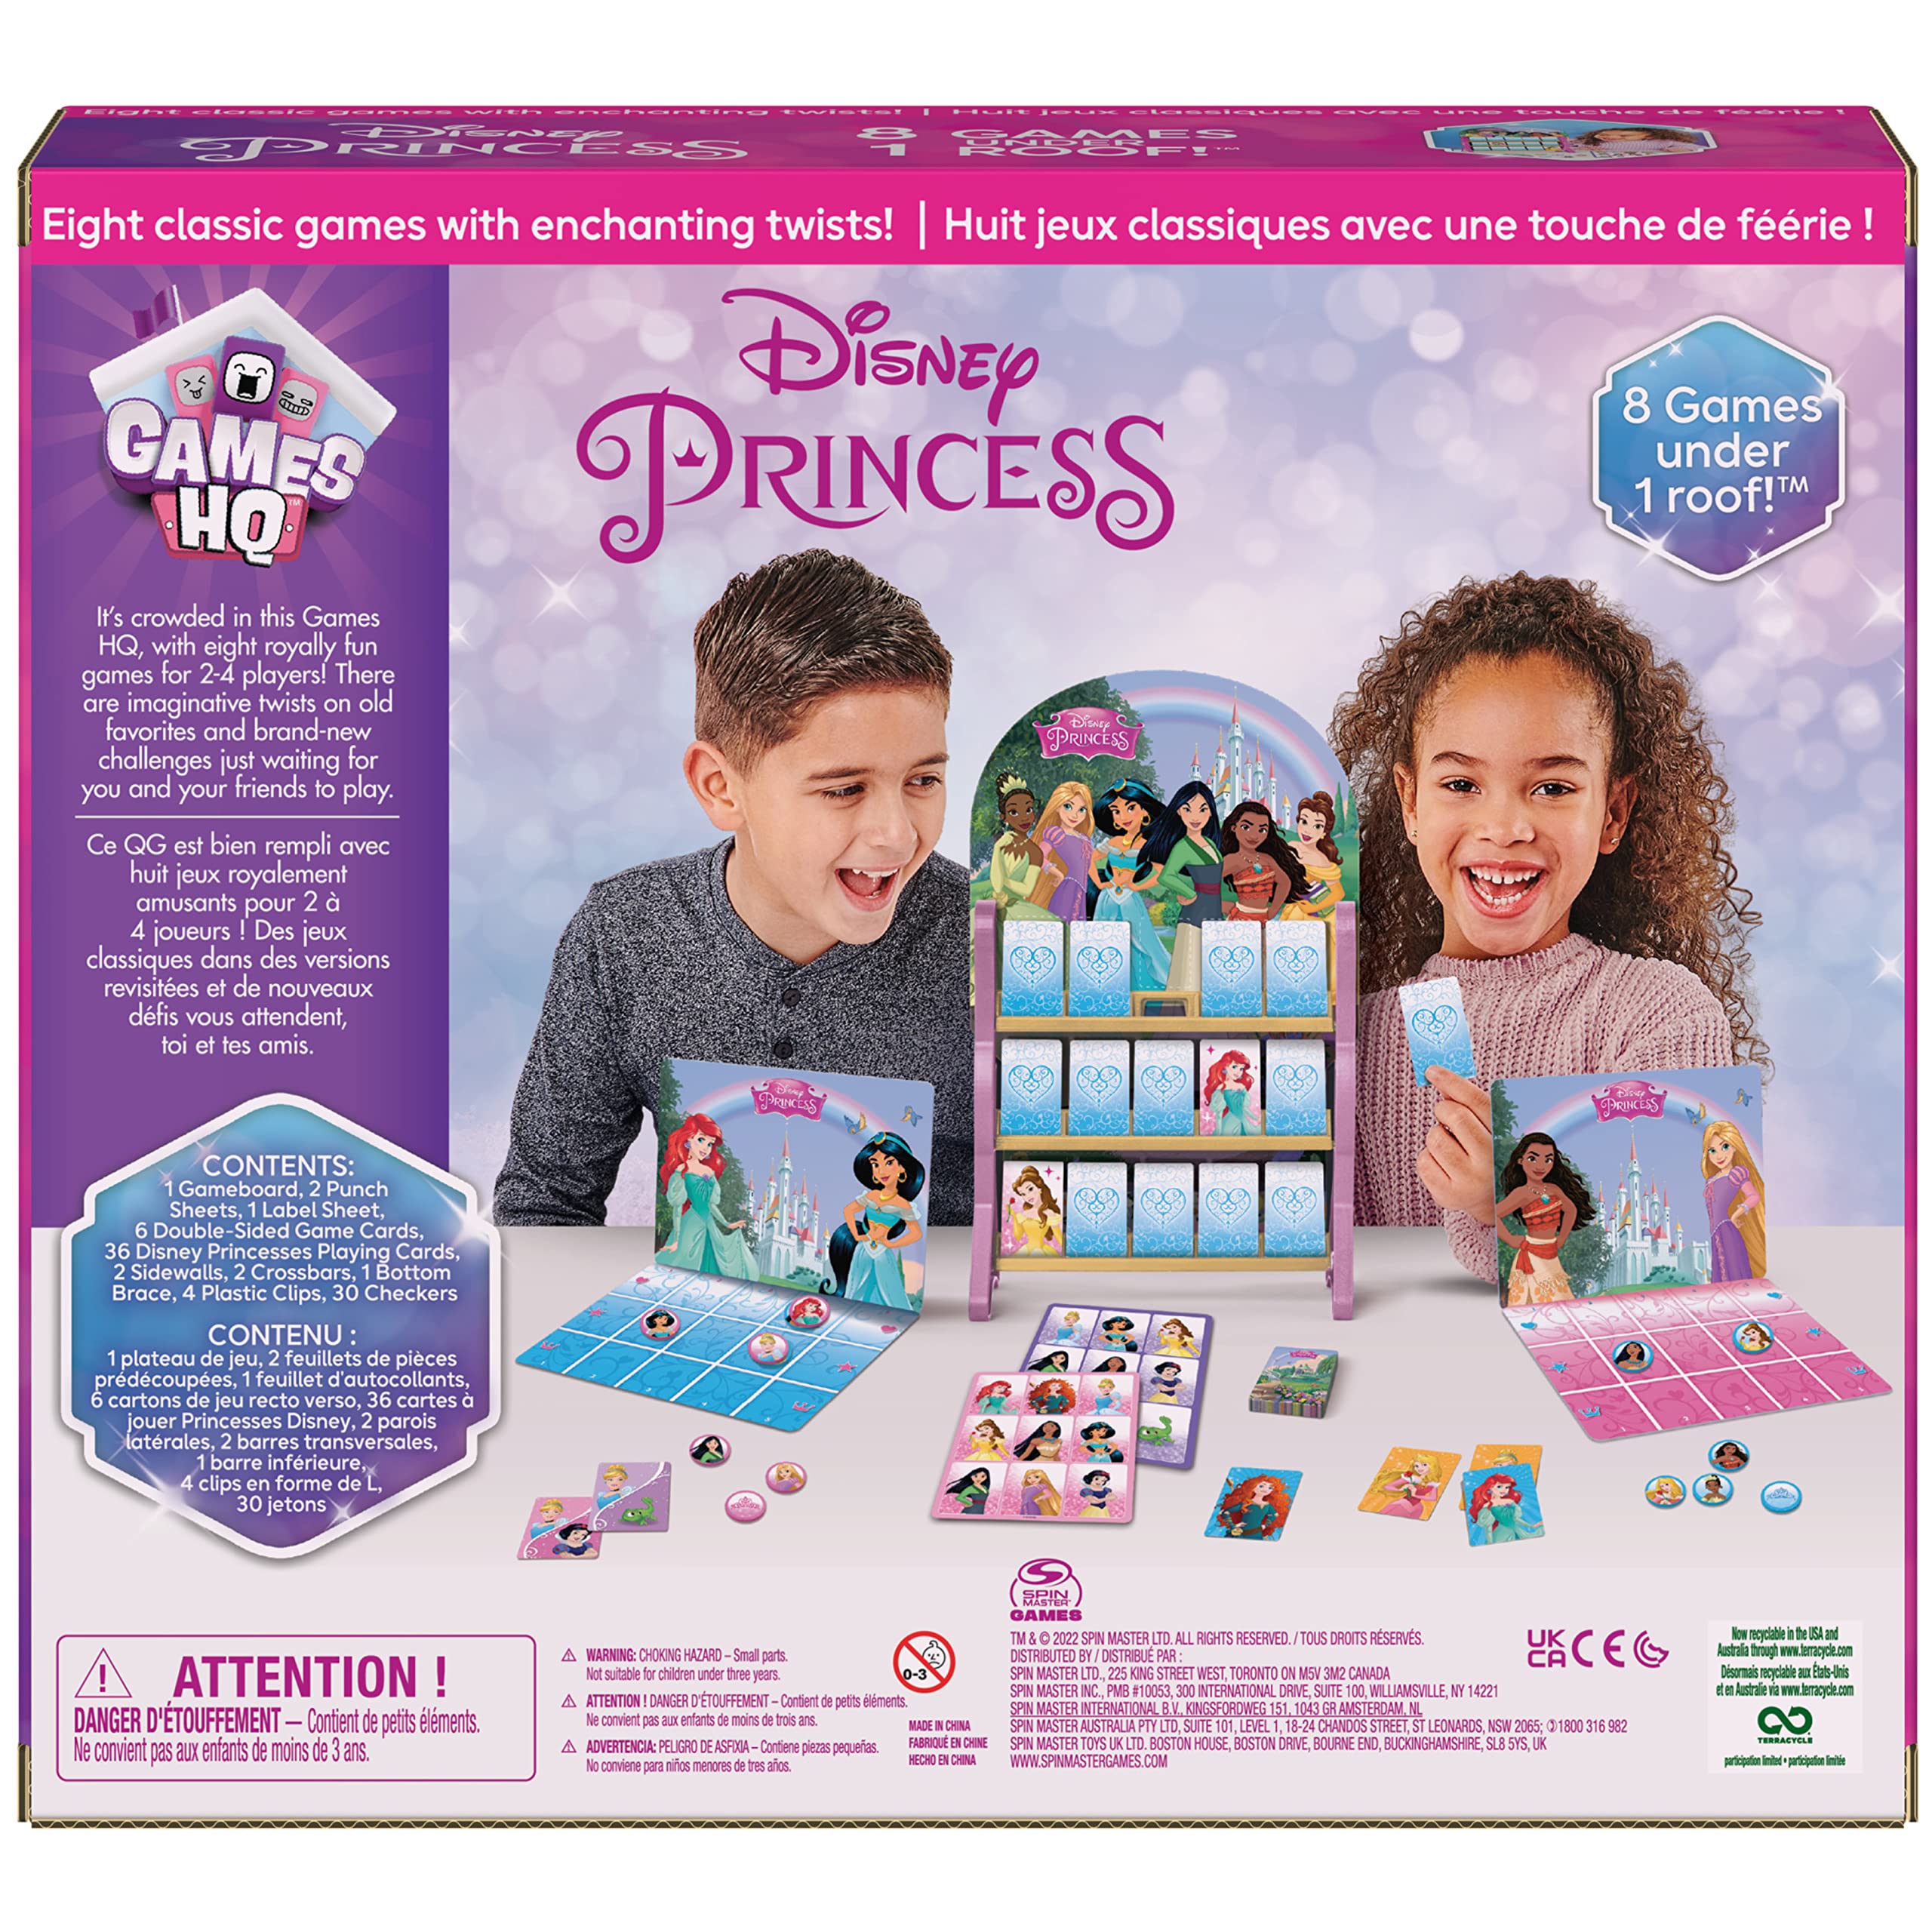 Disney Princess, Games HQ Board Games for Kids Checkers Tic Tac Toe Bingo Go Fish Card Games Disney Princess Toys, for Preschoolers Ages 4 and up